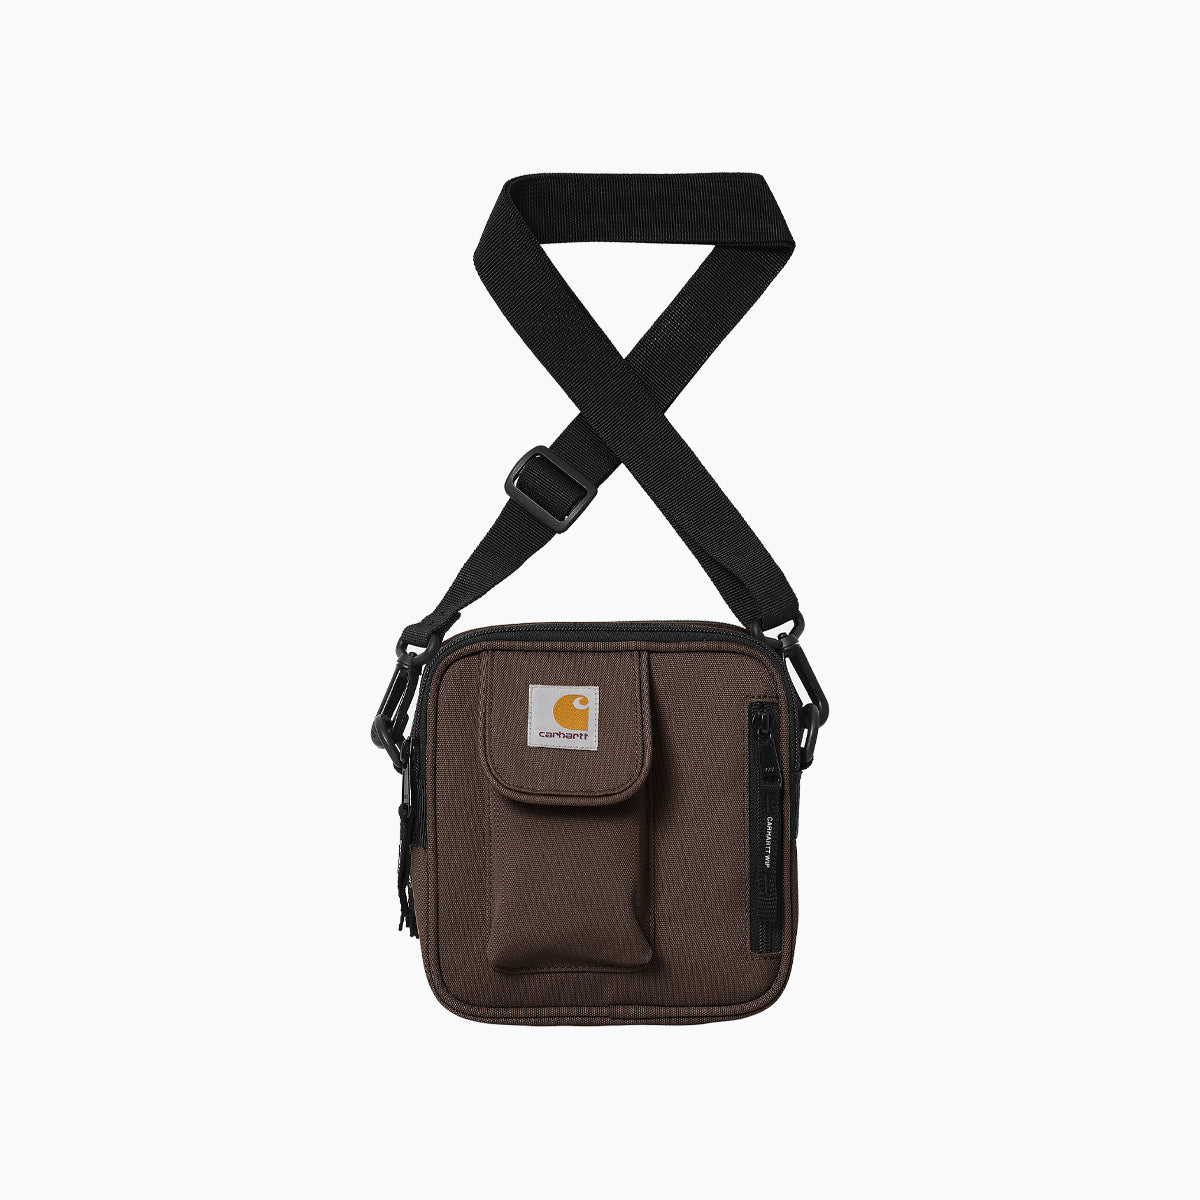 Carhartt WIP Essentials Bag Small-I031470 - 47.XX-Tobacco-One Size-SUEDE Store